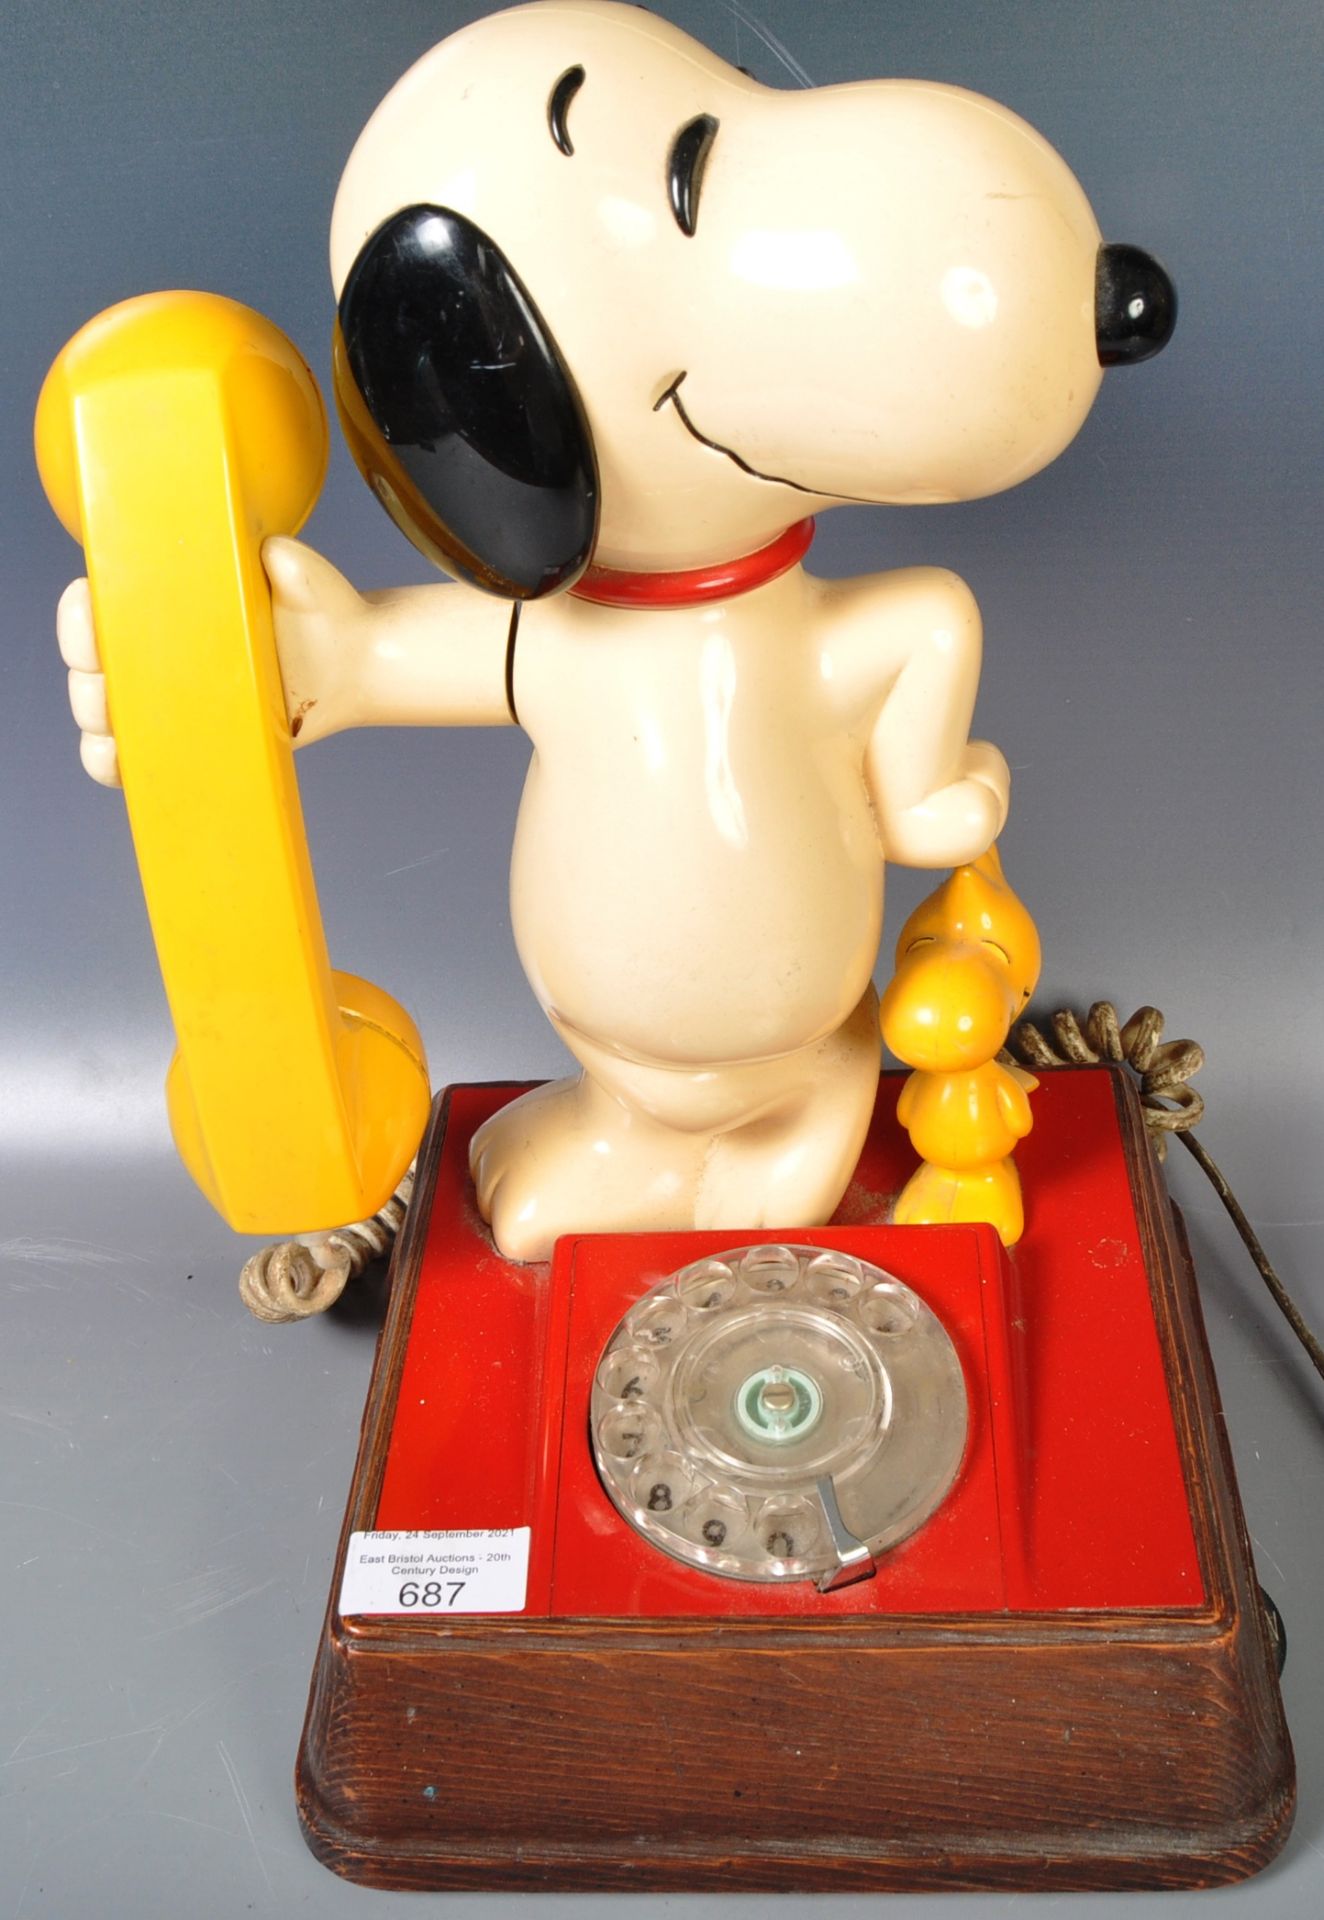 RETRO 1970'S NOVELTY SNOOPY DIAL TELEPHONE - Image 3 of 7